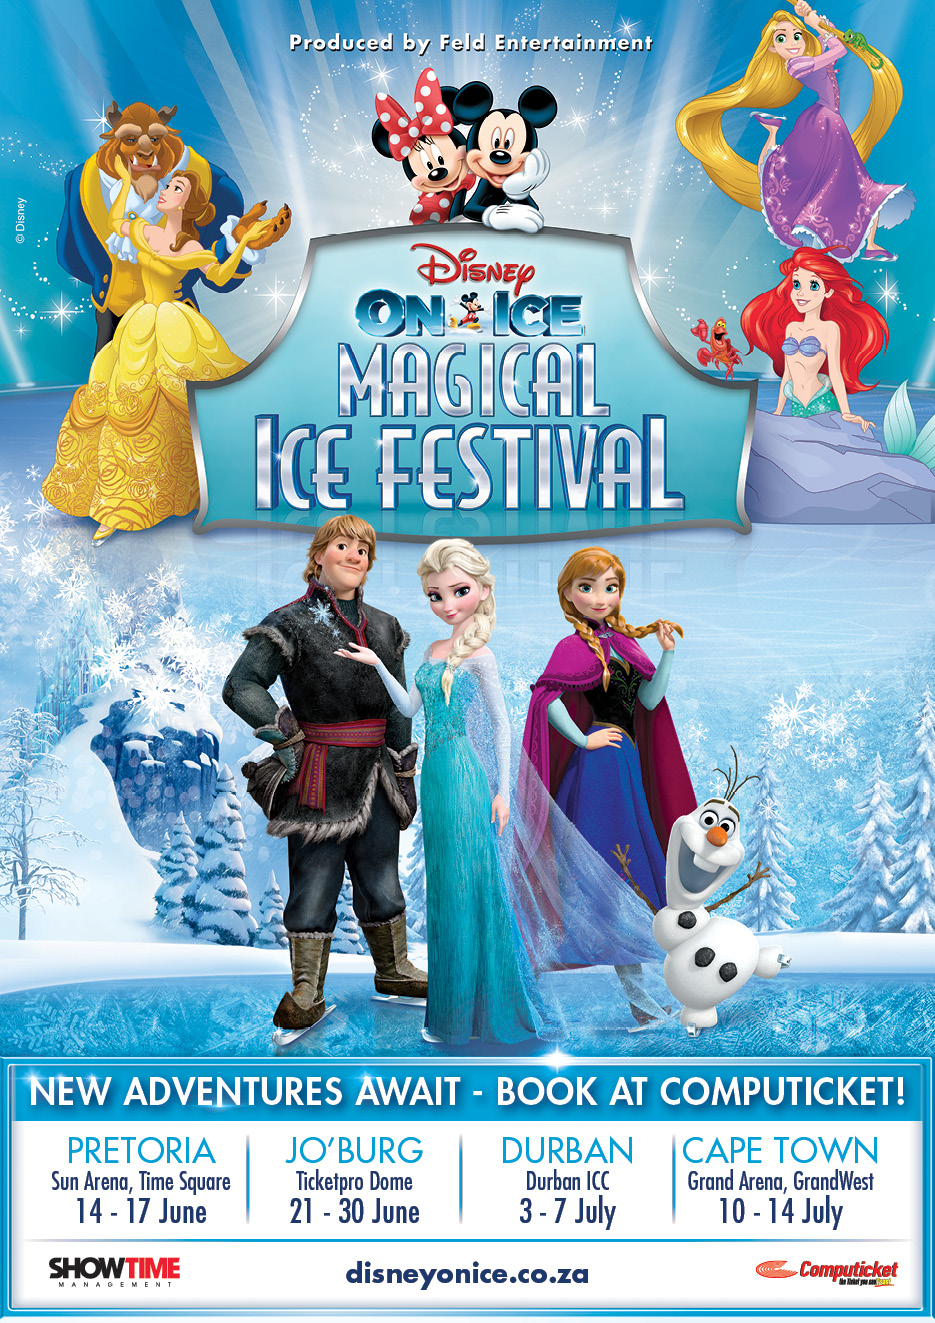 win-one-set-of-4-family-tickets-to-disney-on-ice-at-durban-forts-and